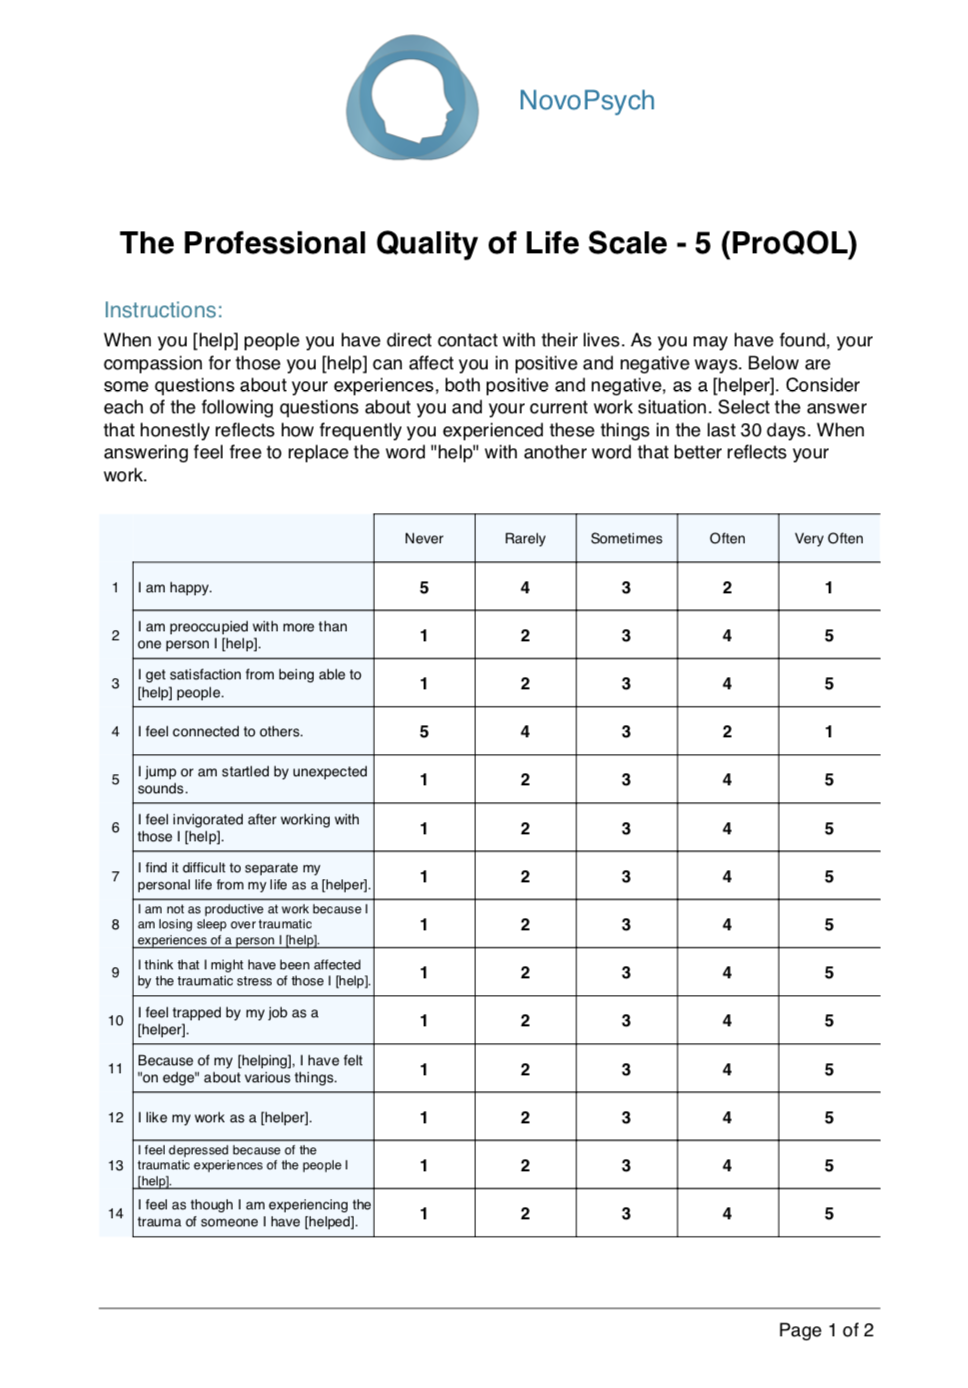 About Journeys Quality of Life Scale for Pets